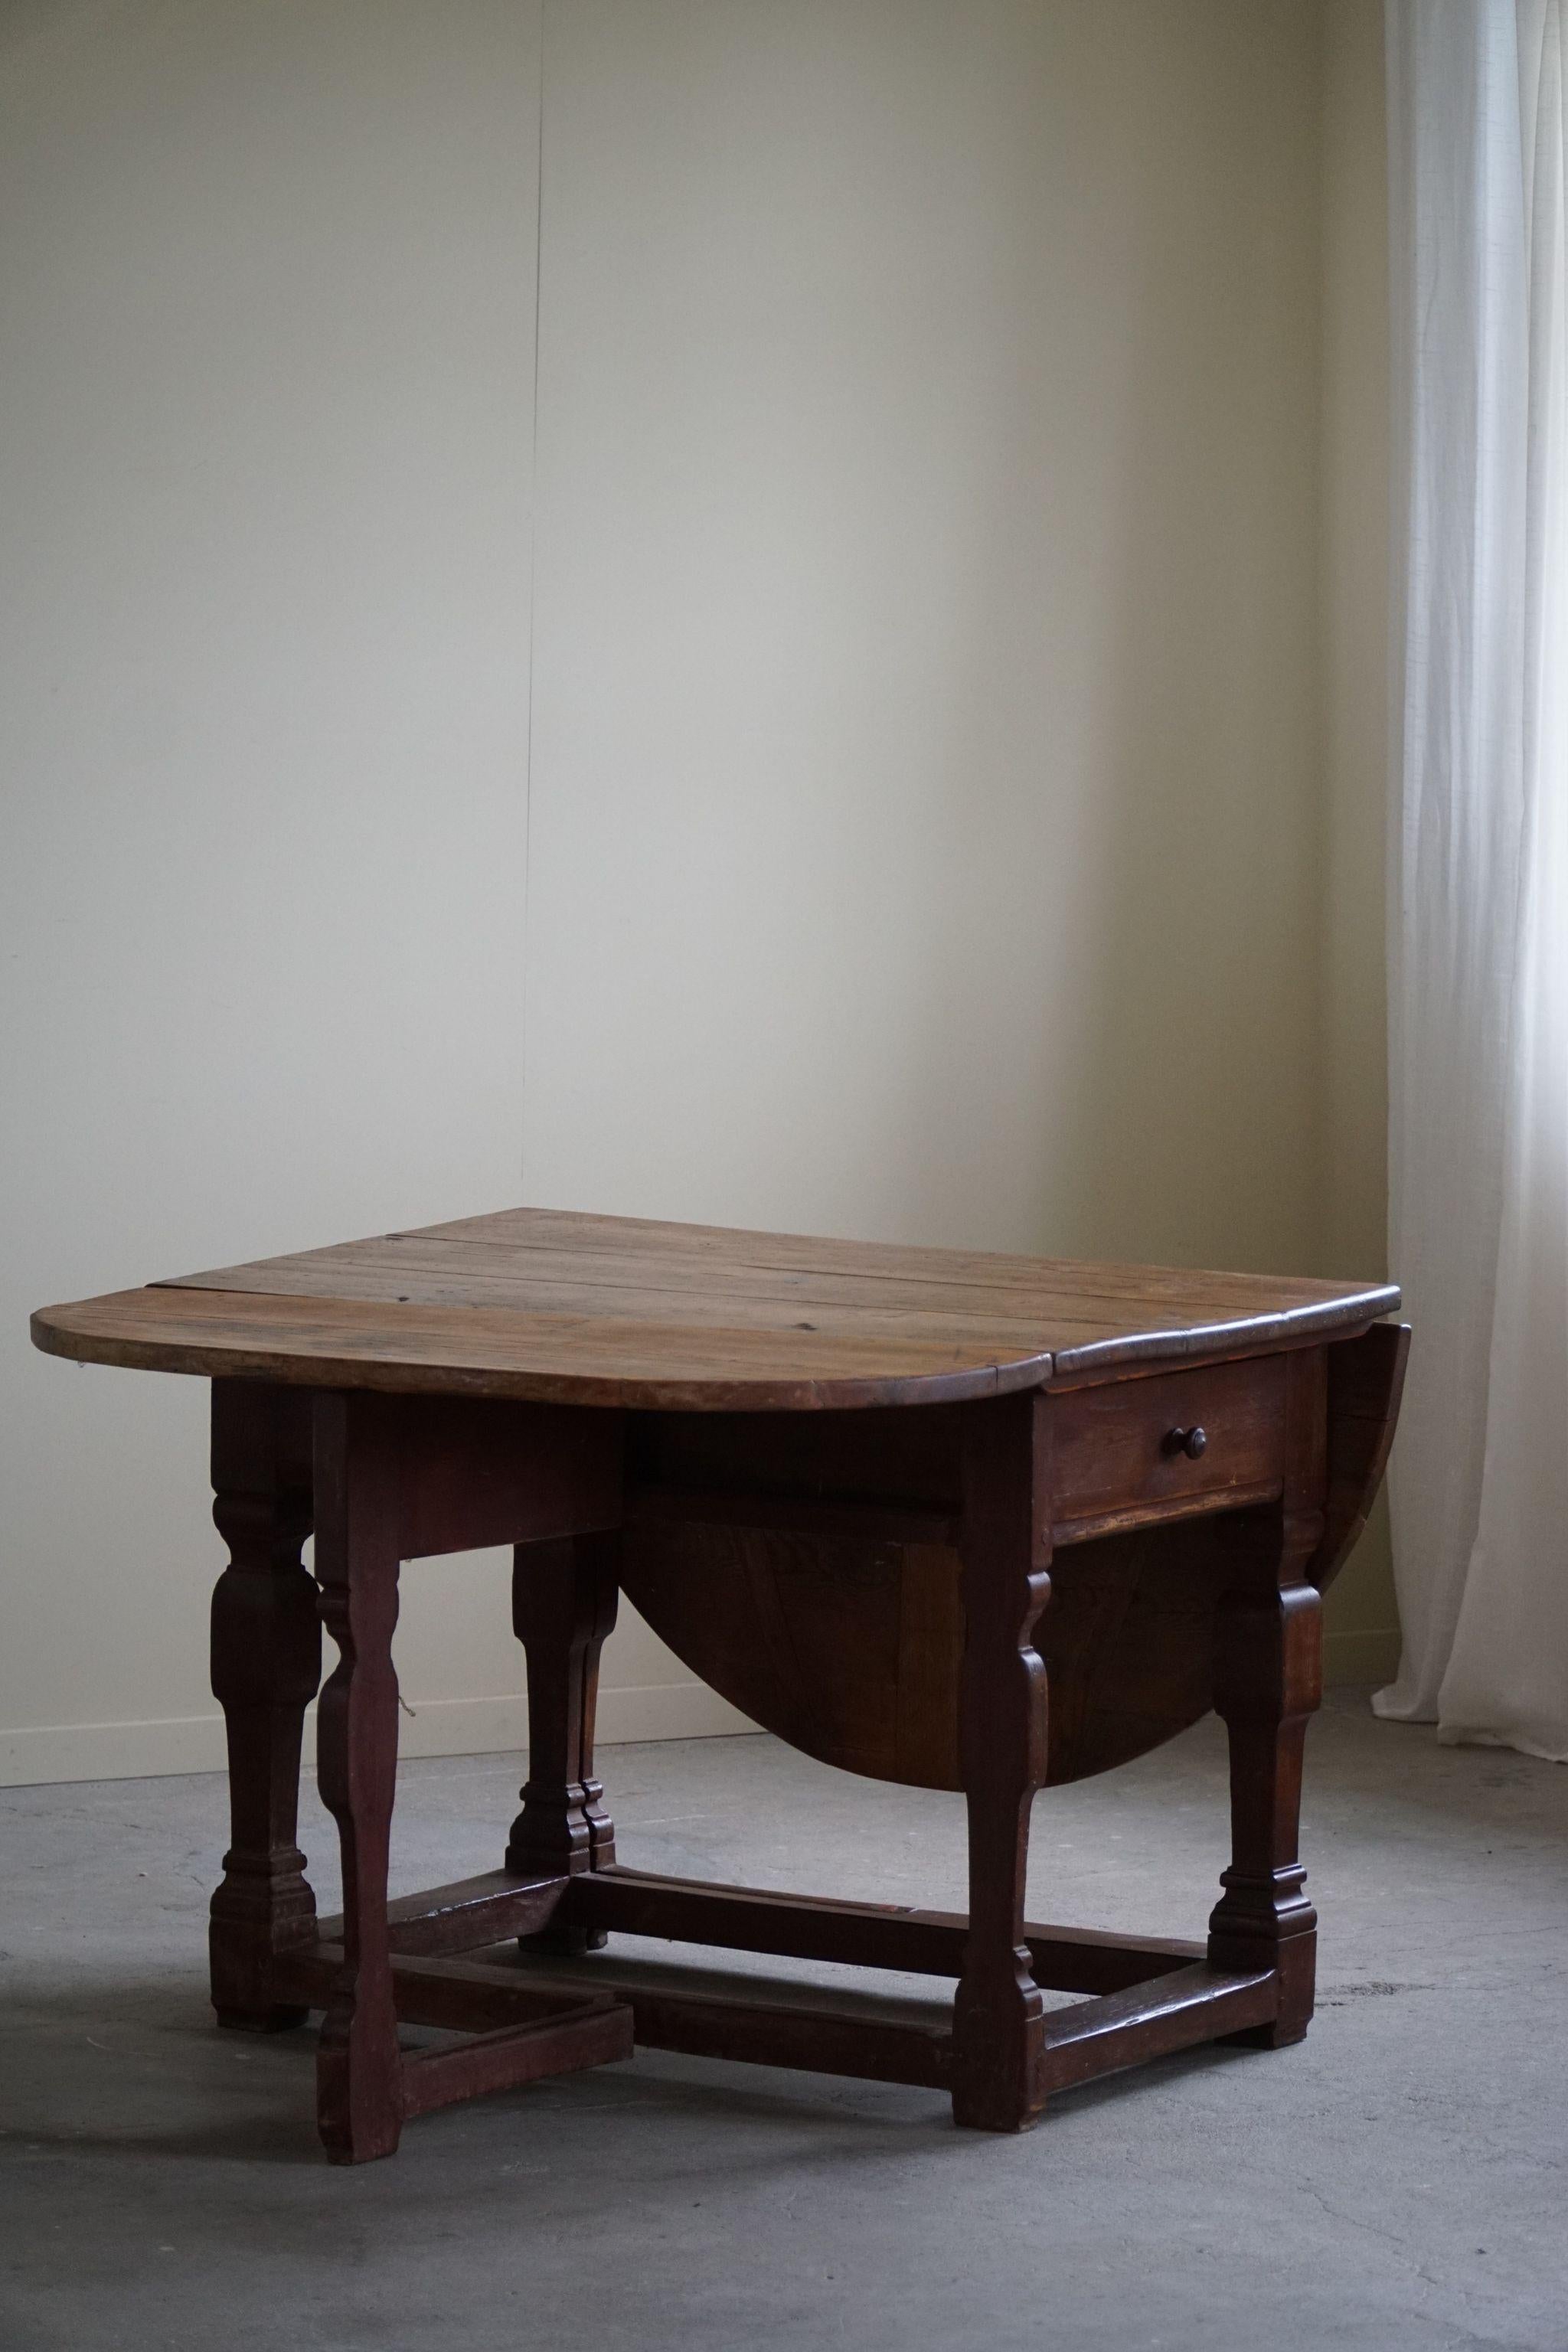 Antique Danish Baroque Drop Leaf Gate Leg Table in Pine, 18th Century In Fair Condition For Sale In Odense, DK